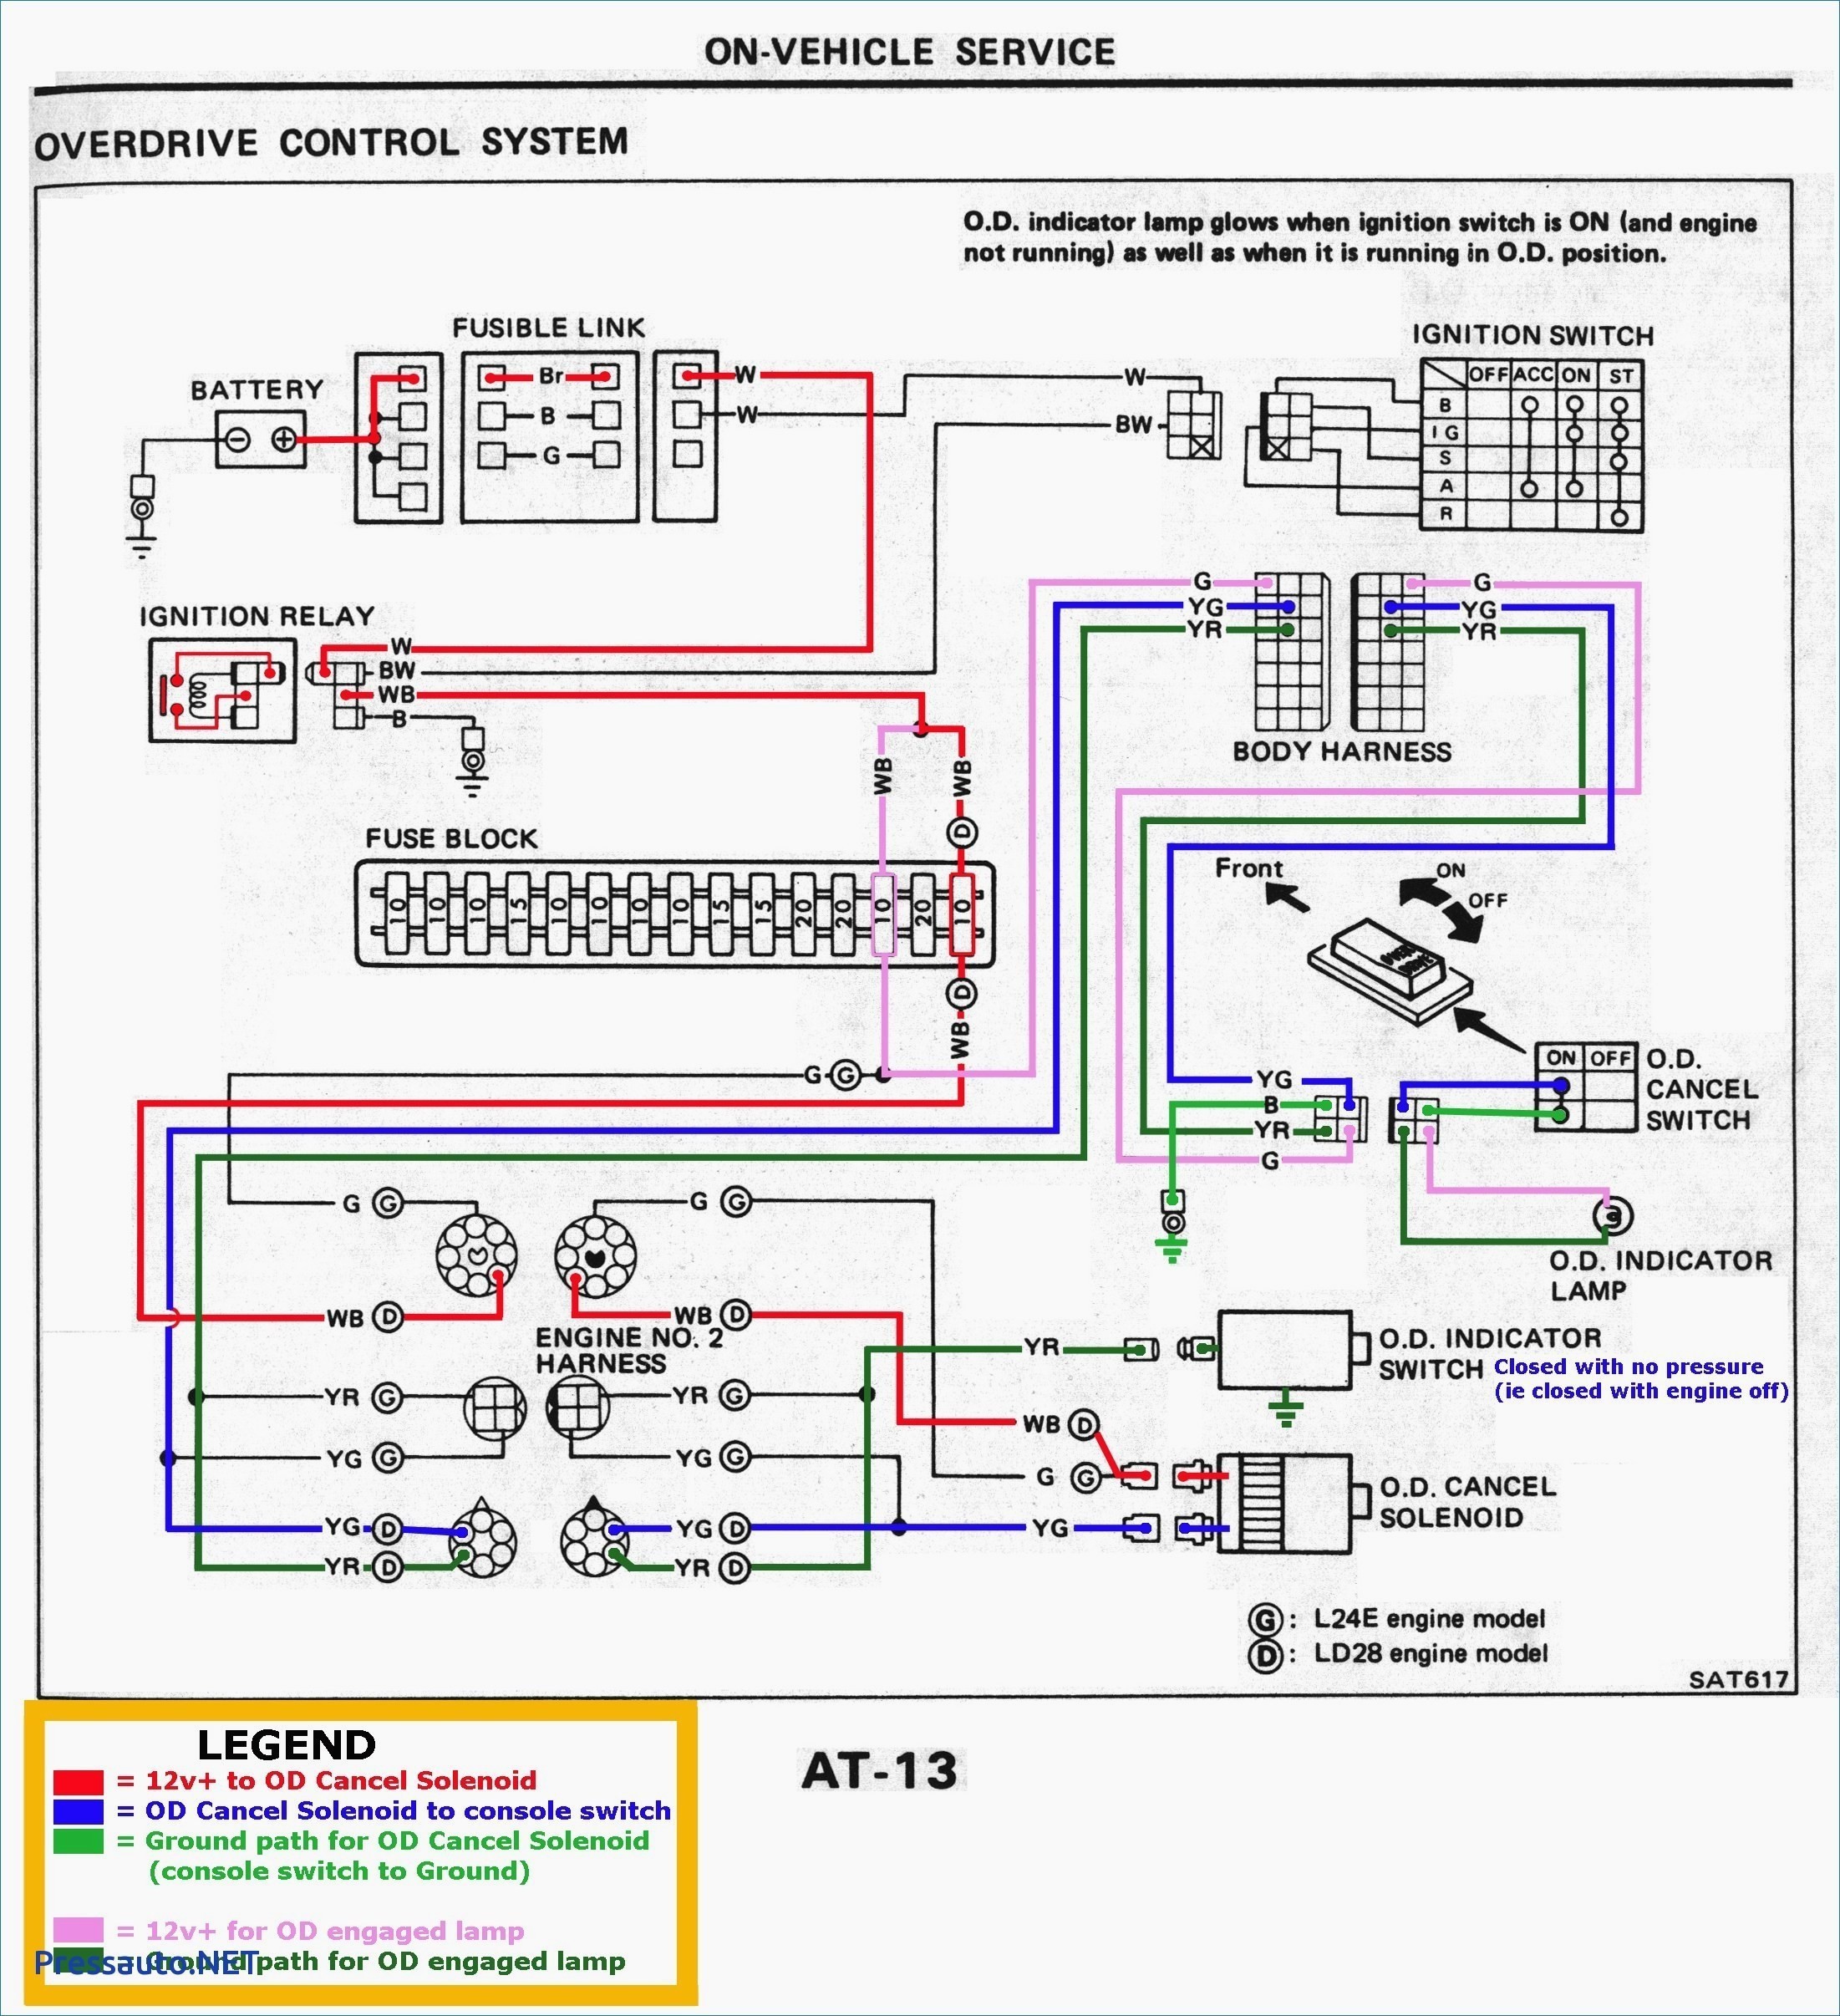 Ford 4 6 Engine Diagram 1987 ford F150 Ignition Wiring Diagram Rate Ks6180 Ignition Switch Of Ford 4 6 Engine Diagram